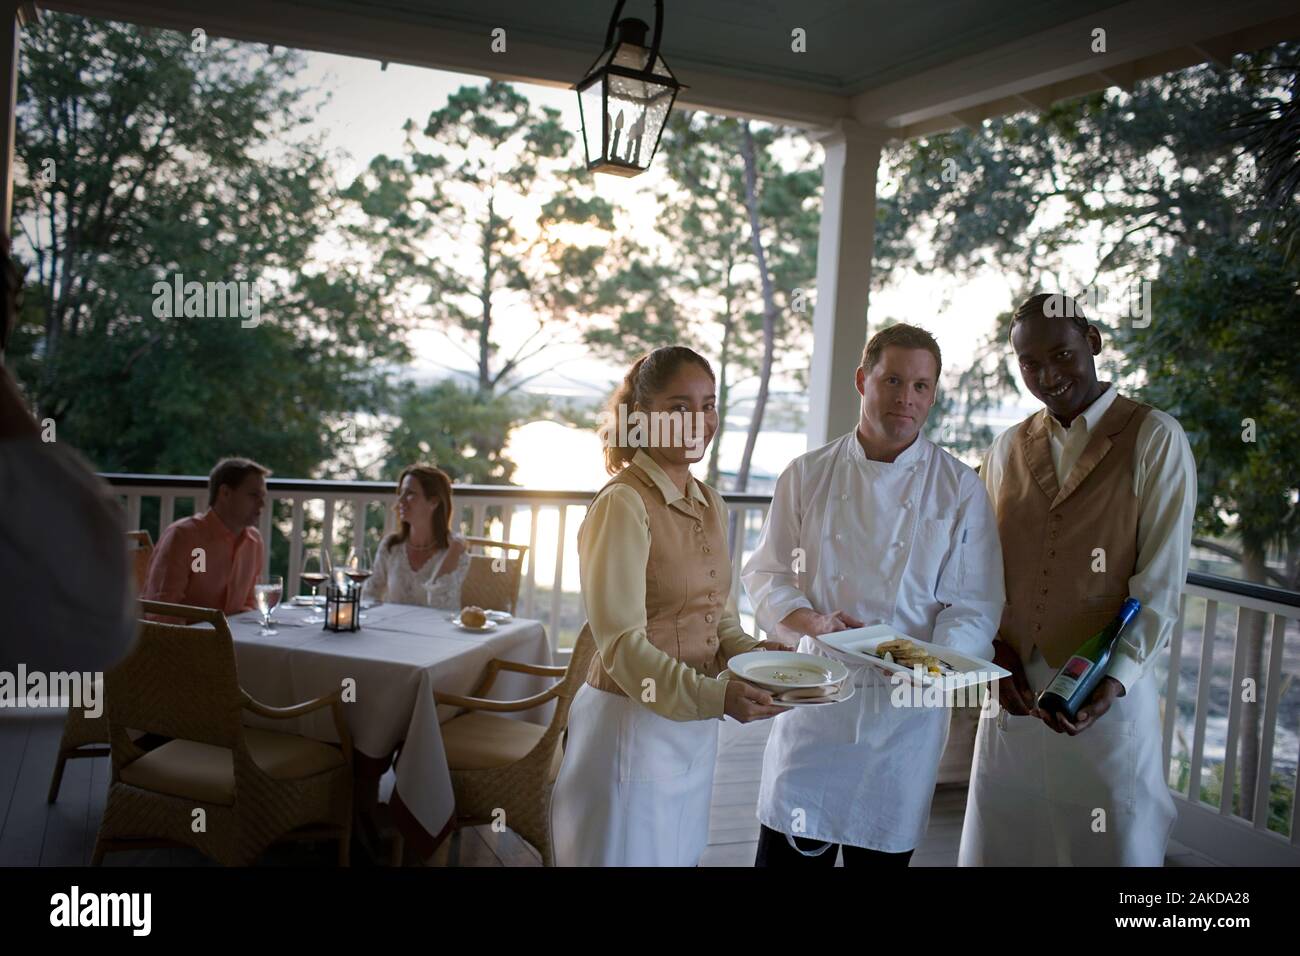 Portrait of a mid-adult male chef holding food with young adult male and female wait staff. Stock Photo